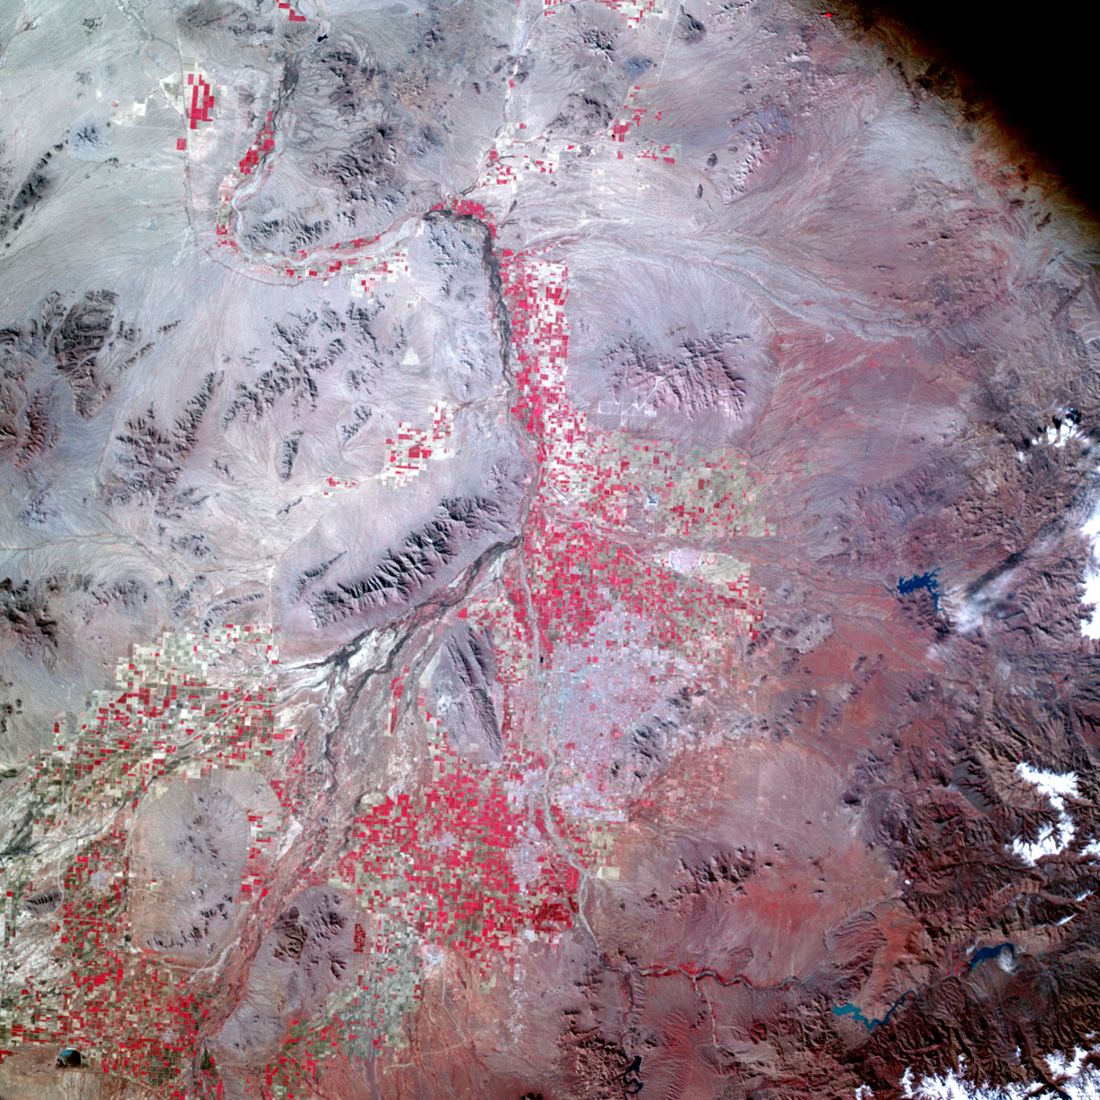 The city of Phoenix and environs imaged using infrared light by the Apollo 9 astronauts as part of Experiment S065.